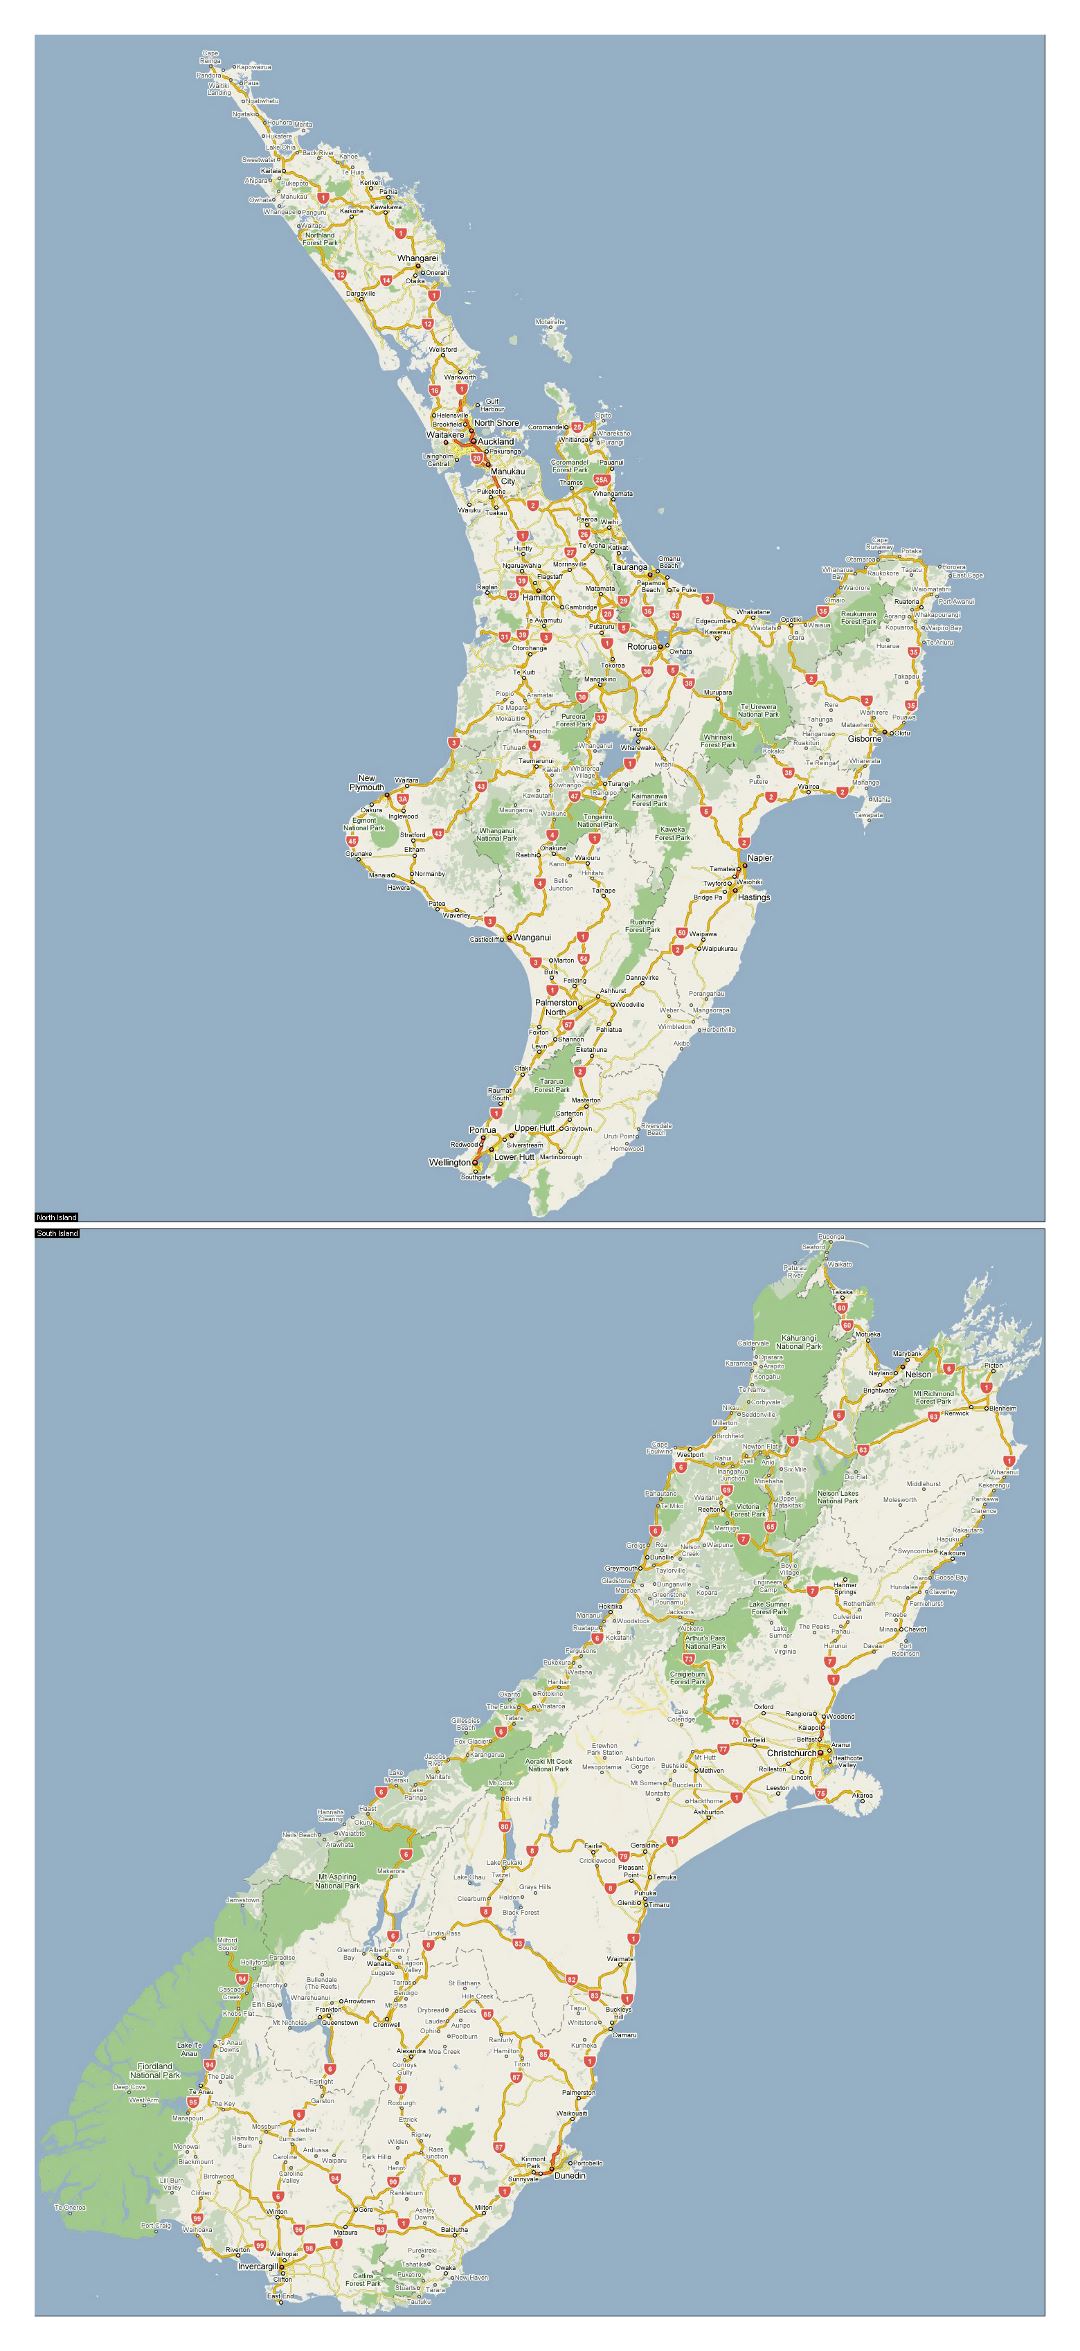 Large road map of New Zealand with national parks and cities